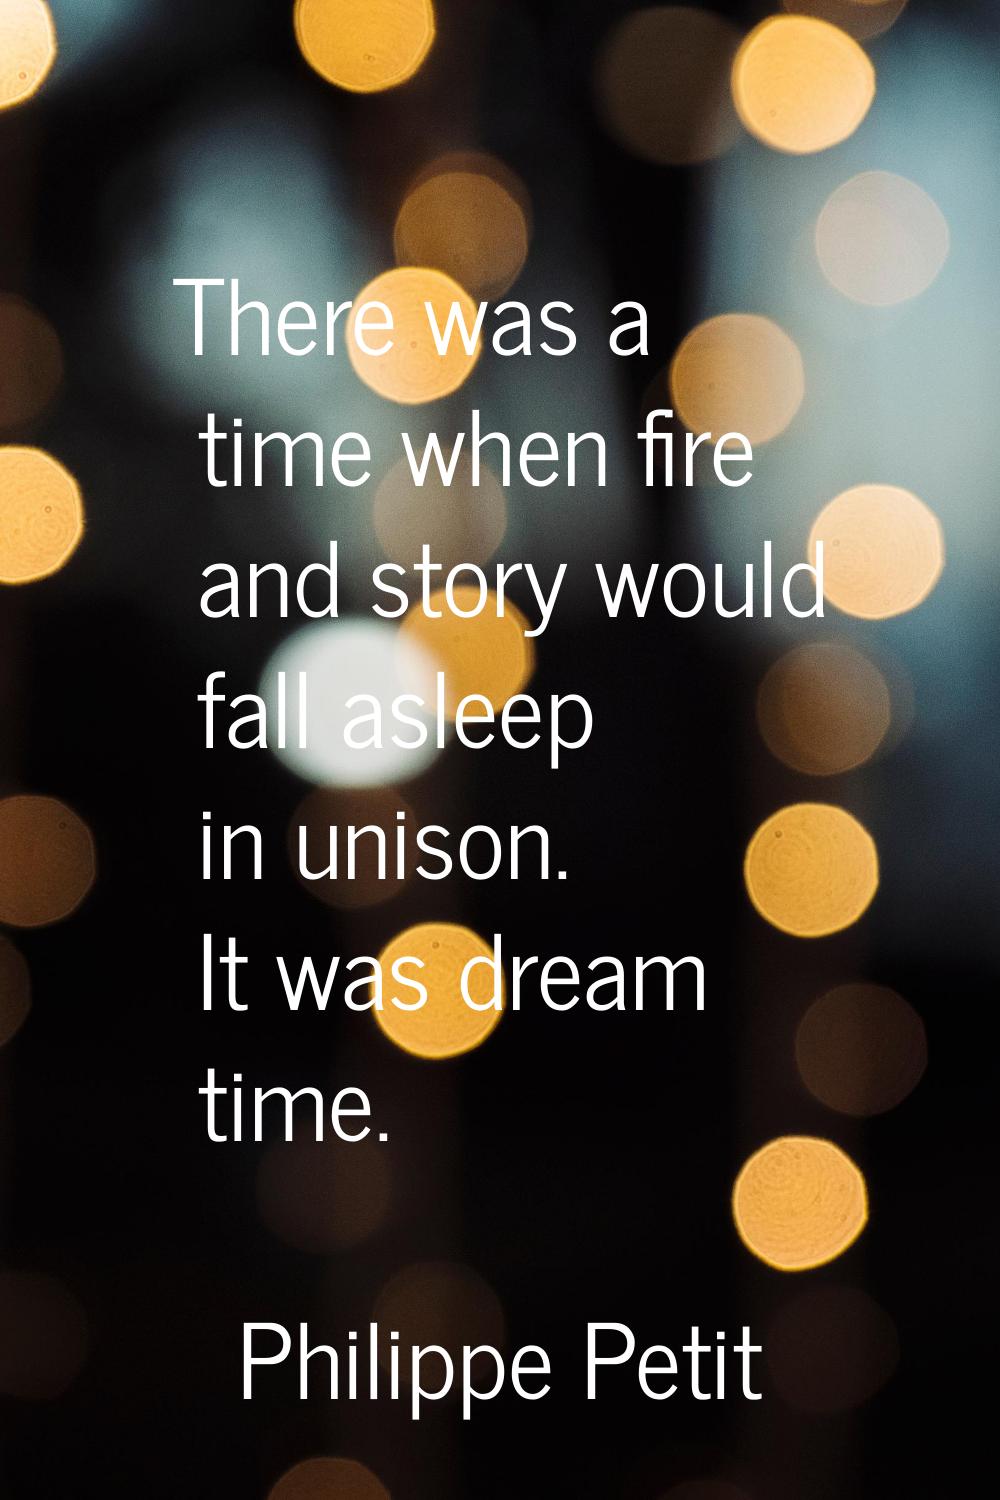 There was a time when fire and story would fall asleep in unison. It was dream time.